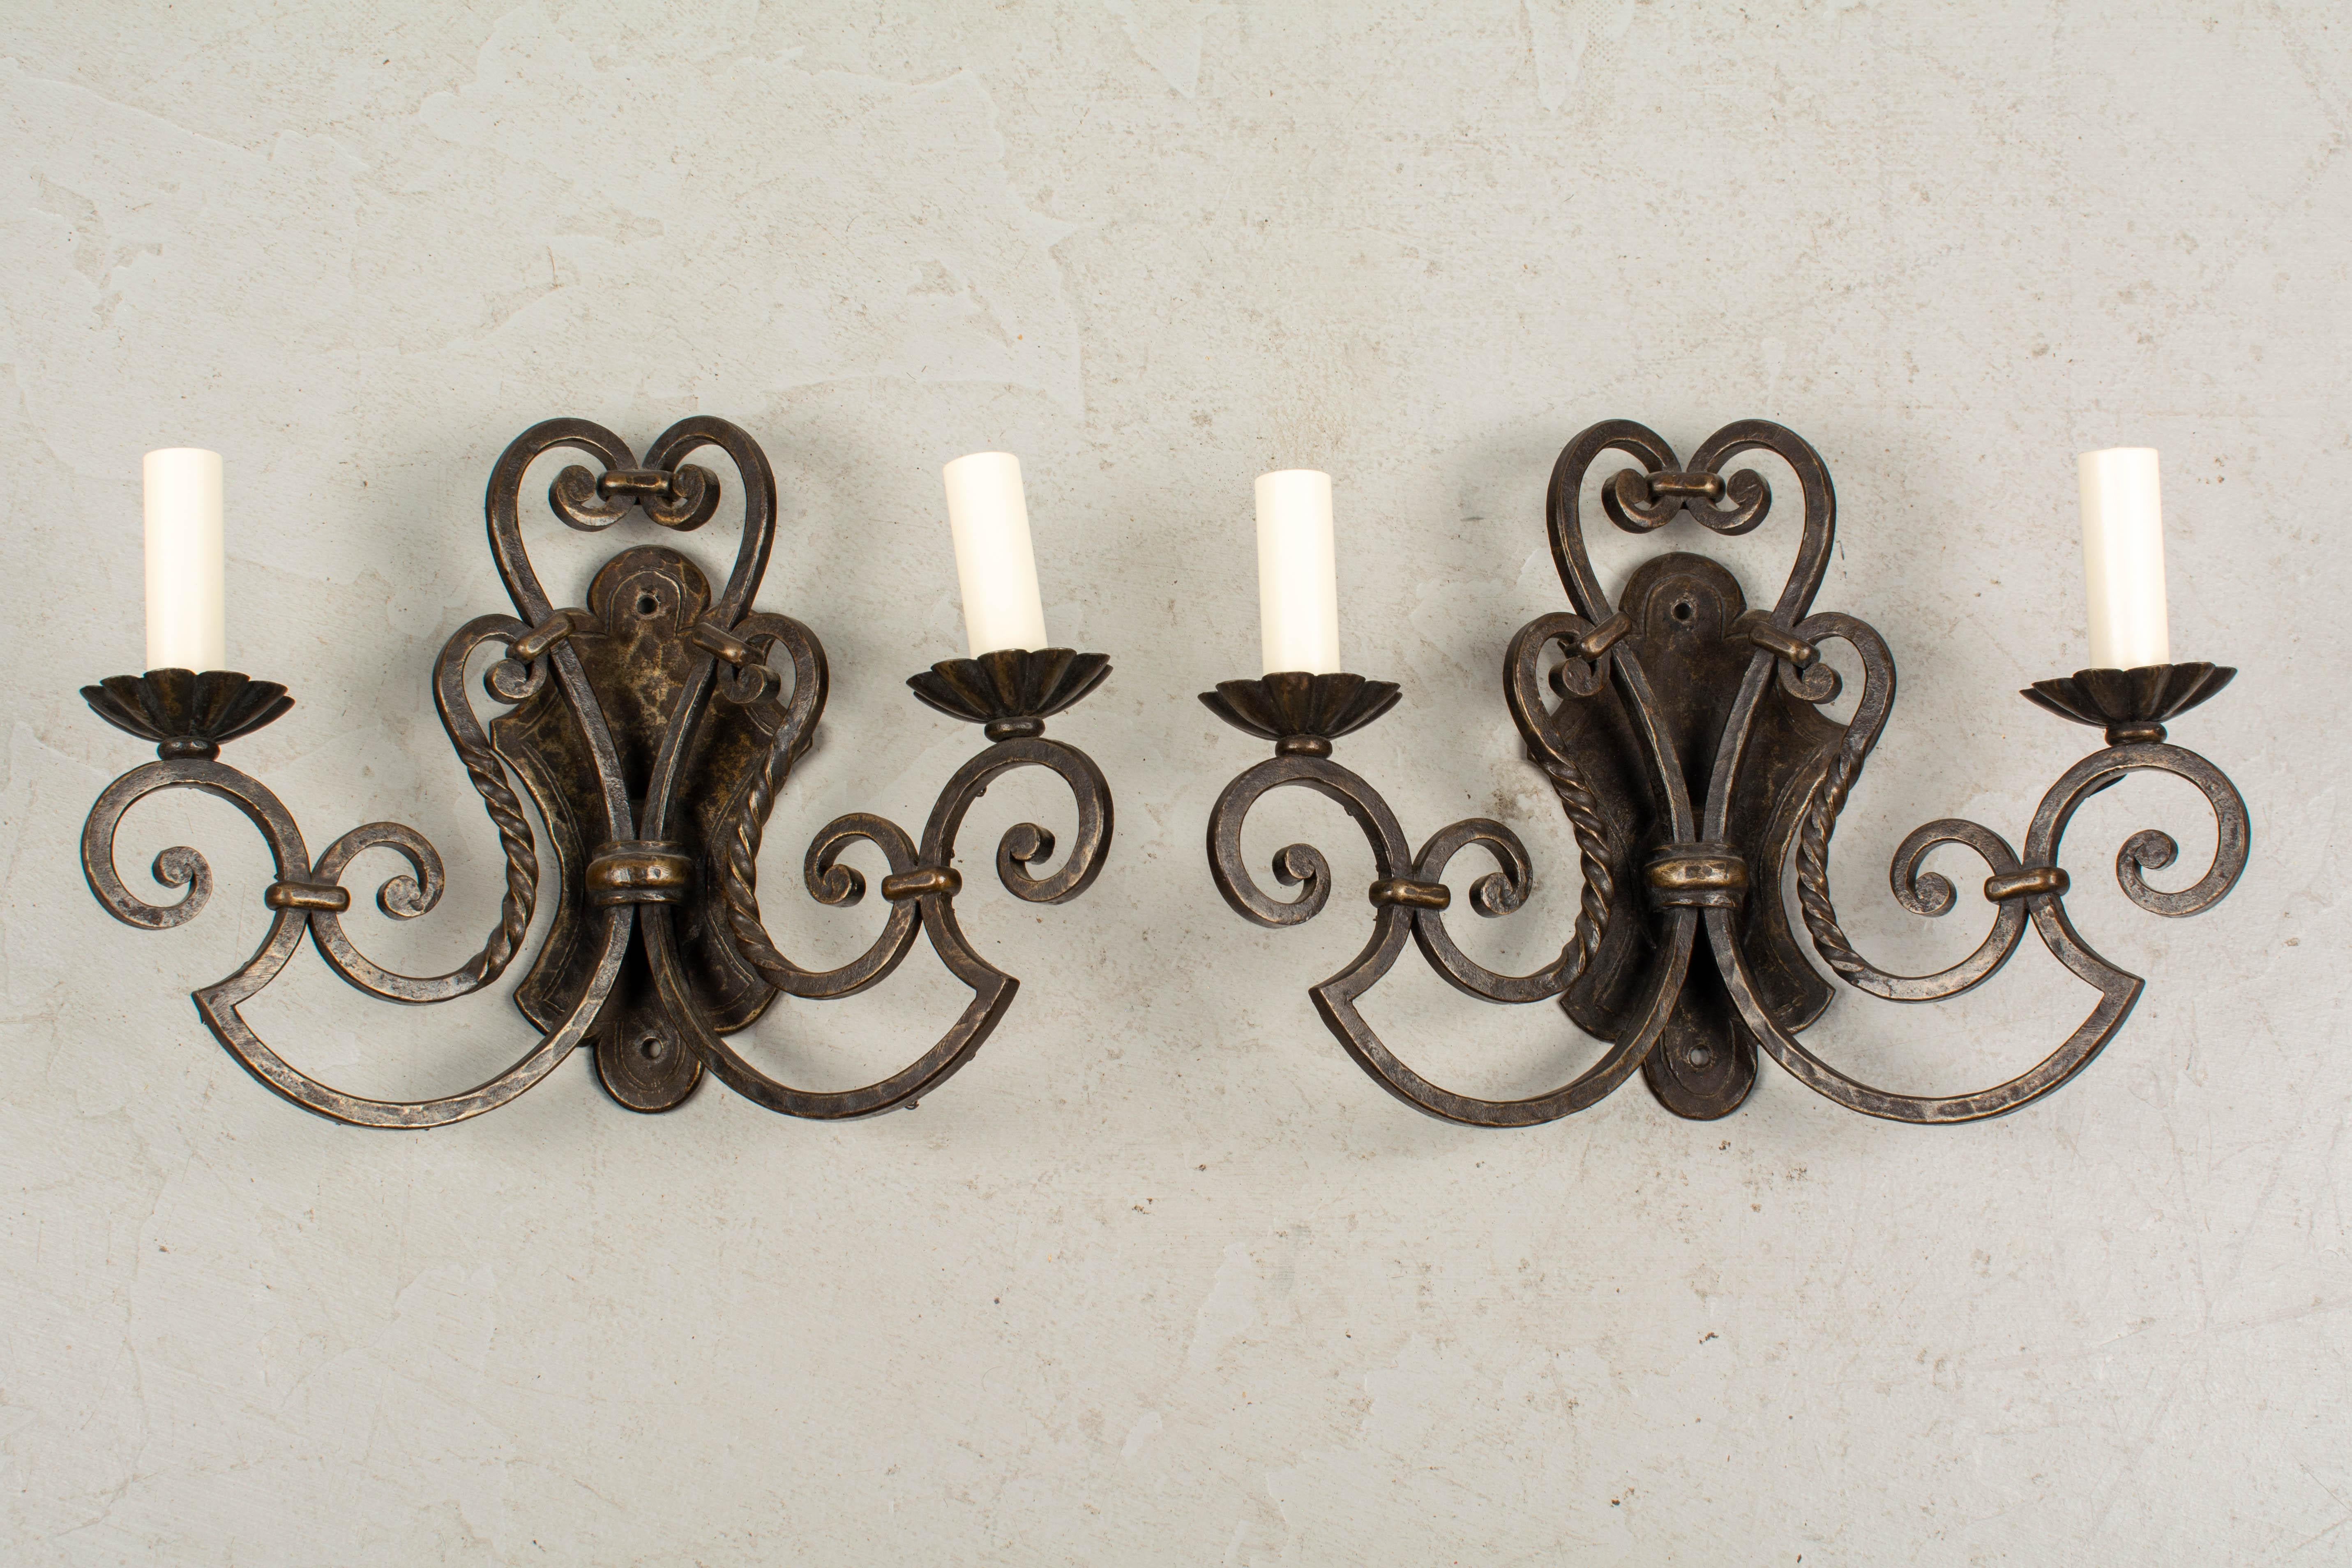 A pair of French wrought iron and two-light sconces with scroll form and bronze patina. Rewired with new sockets and candles covers.